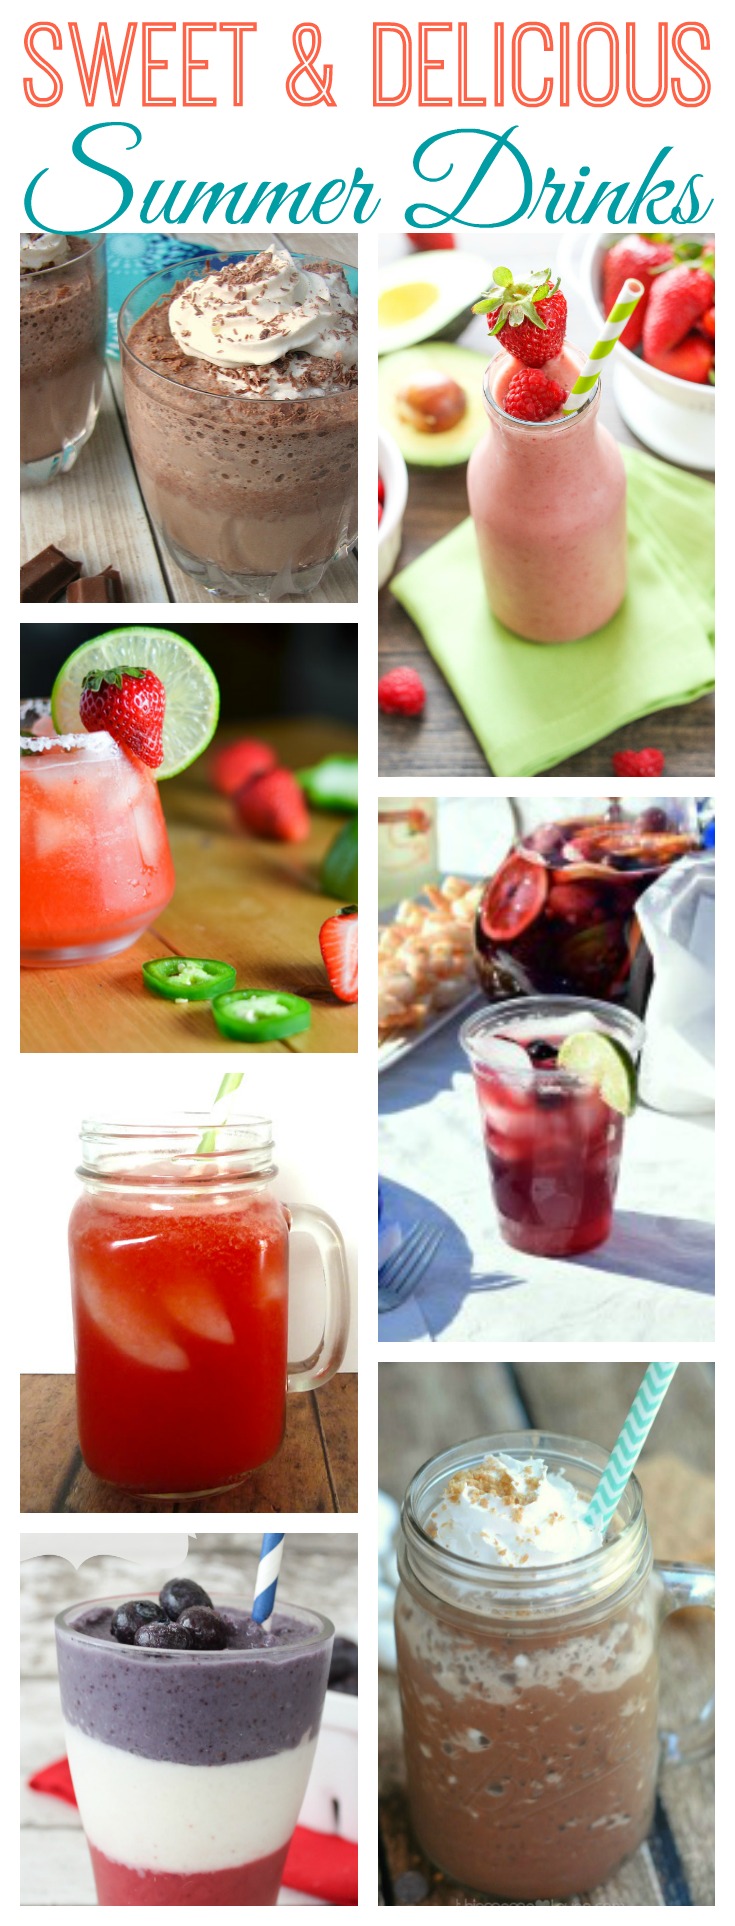 sweet and delicious summer drinks